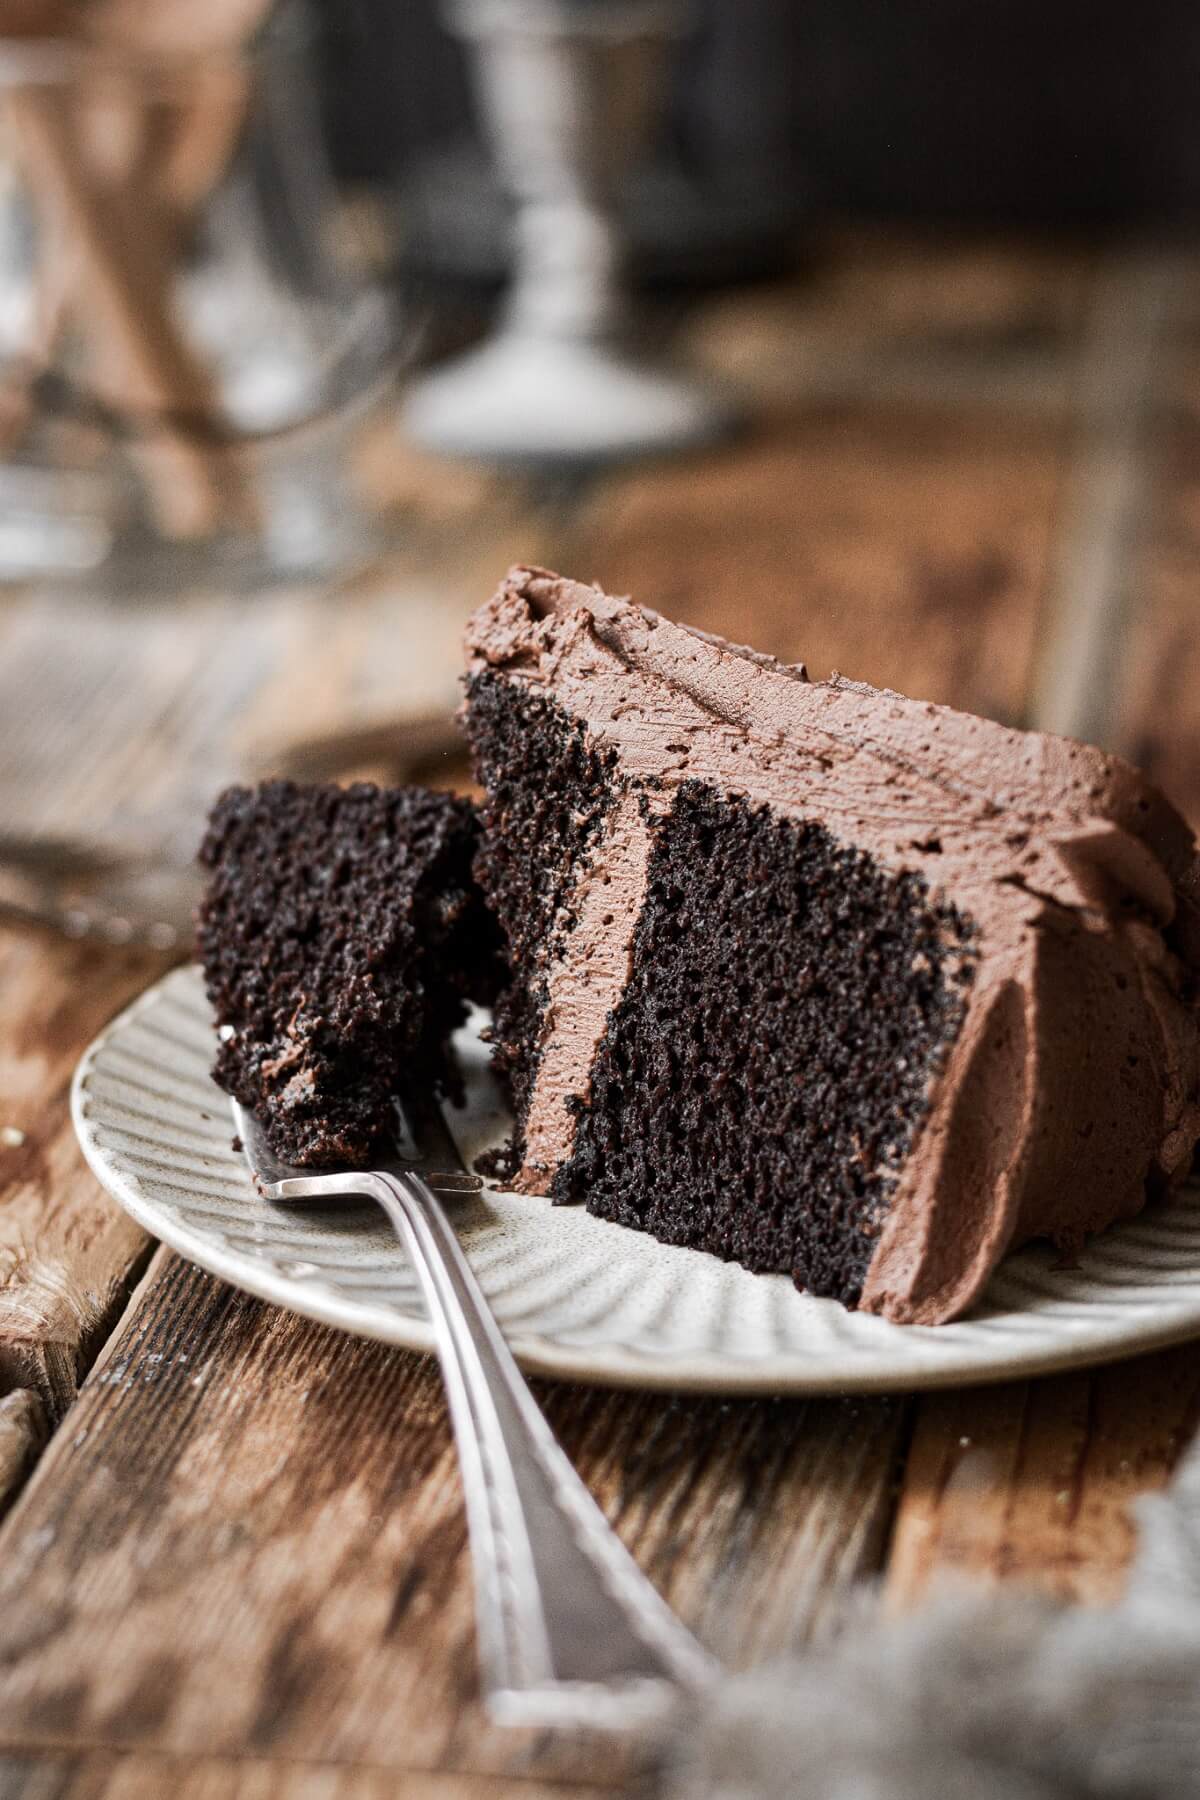 Slice of chocolate cake with a bite taken.